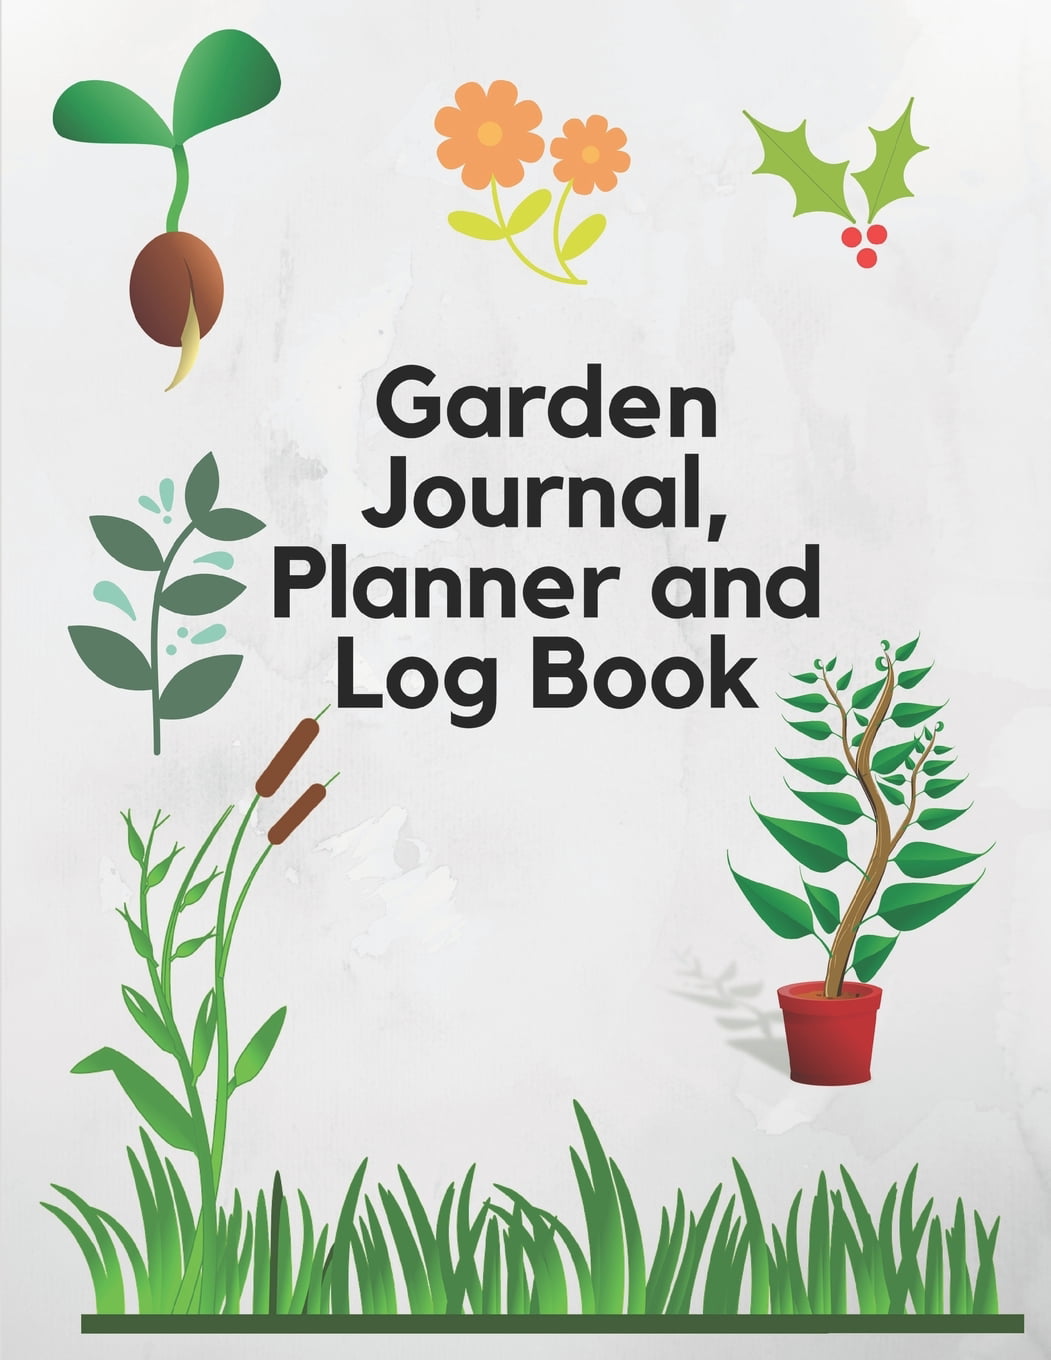 Harvesting Tracker Larg Maintenace Chore List Expense Tracker Garden Project Tracker Plant Care Record Monthly & Seasoning Planning Journal Notes Gardening Log Book: Garden Journal Planner Notebook For Yearly Manage Finance Budget Design Layout